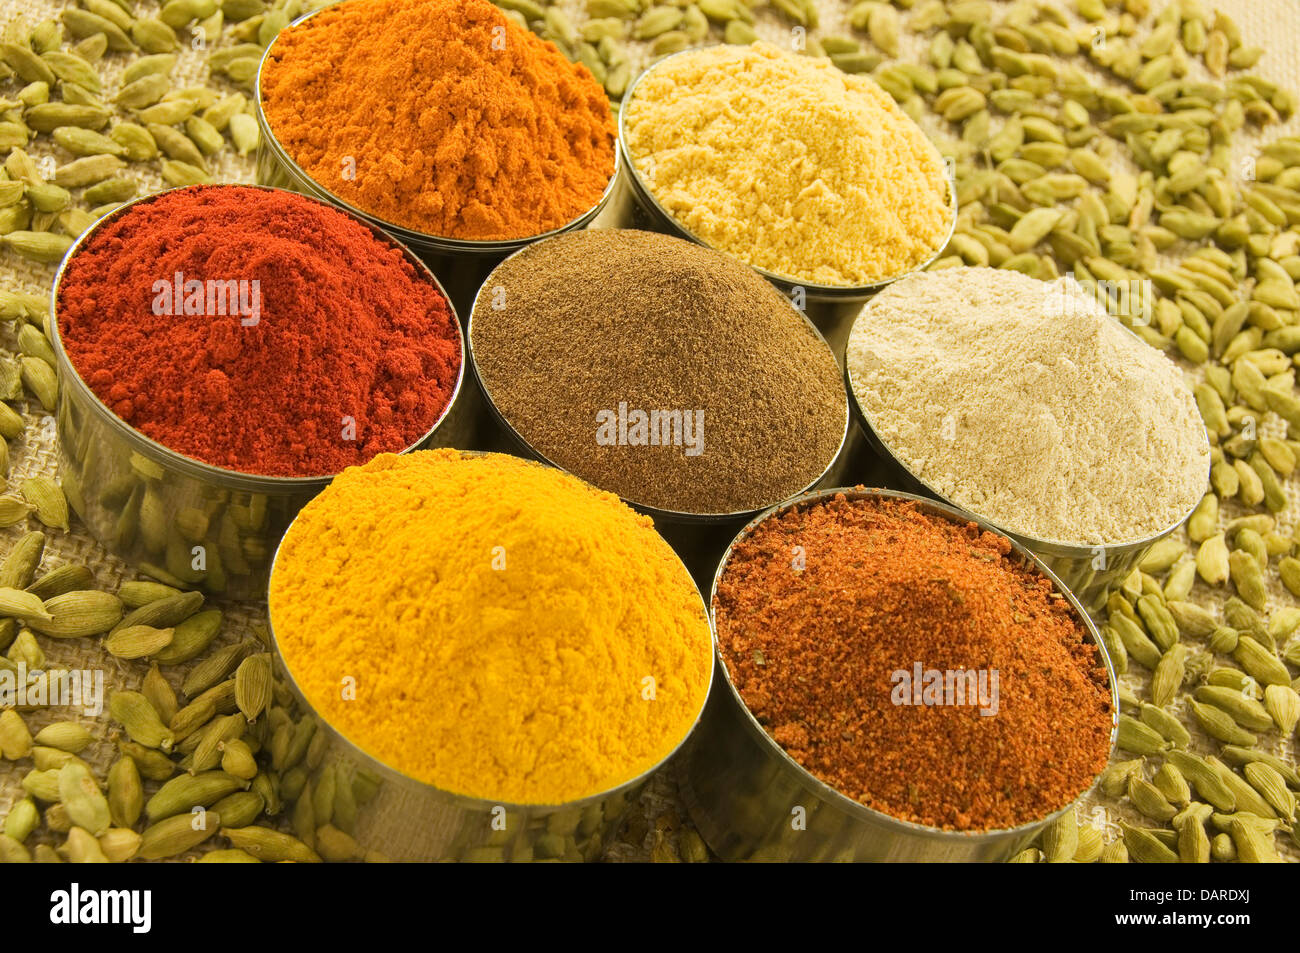 Spice powders and seeds Stock Photo